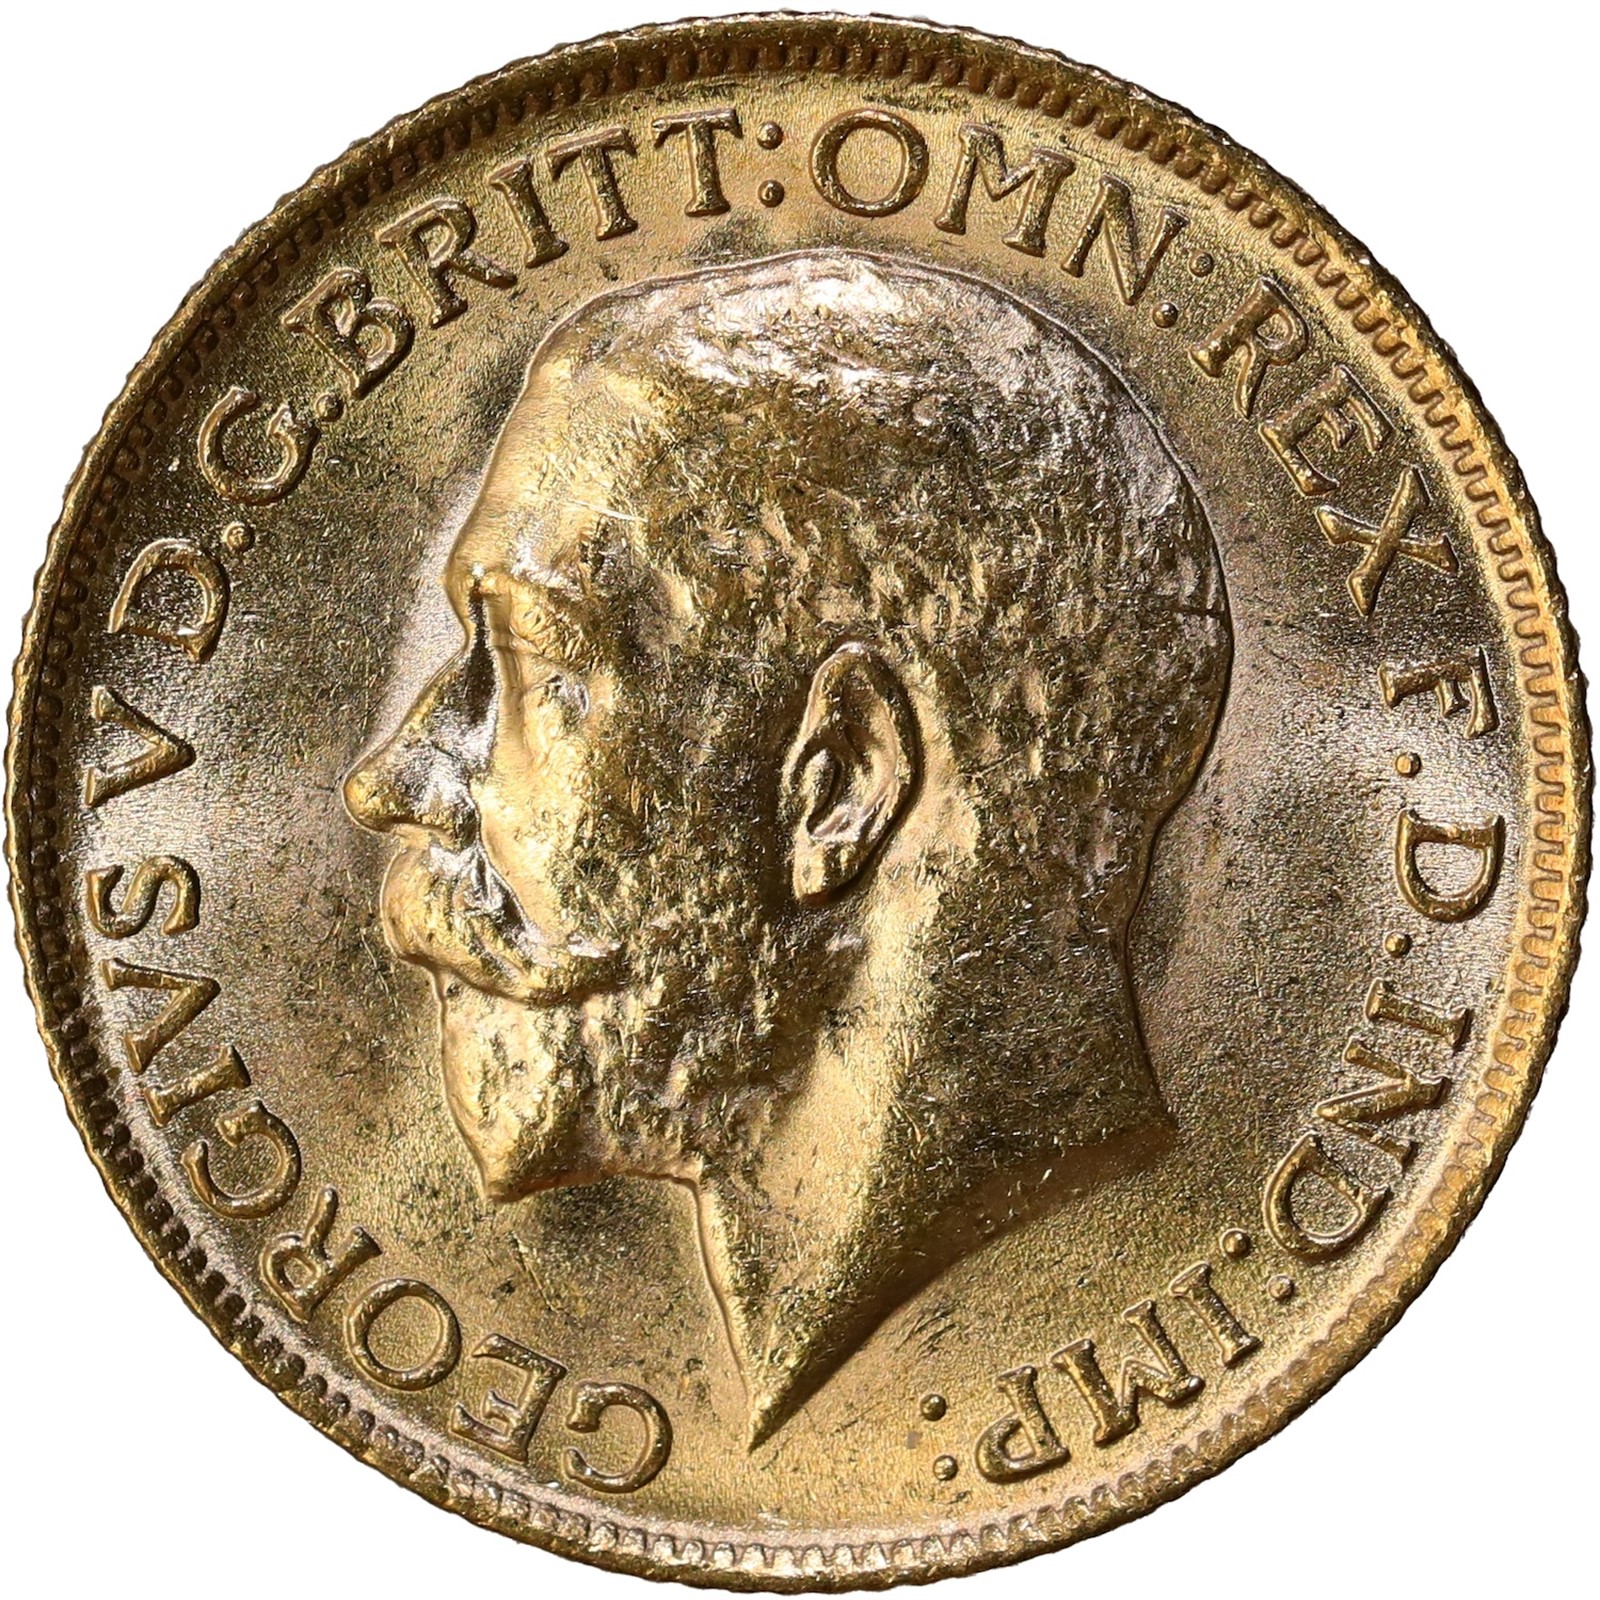 GREAT BRITAIN. George V. Sovereign 1913. UNC